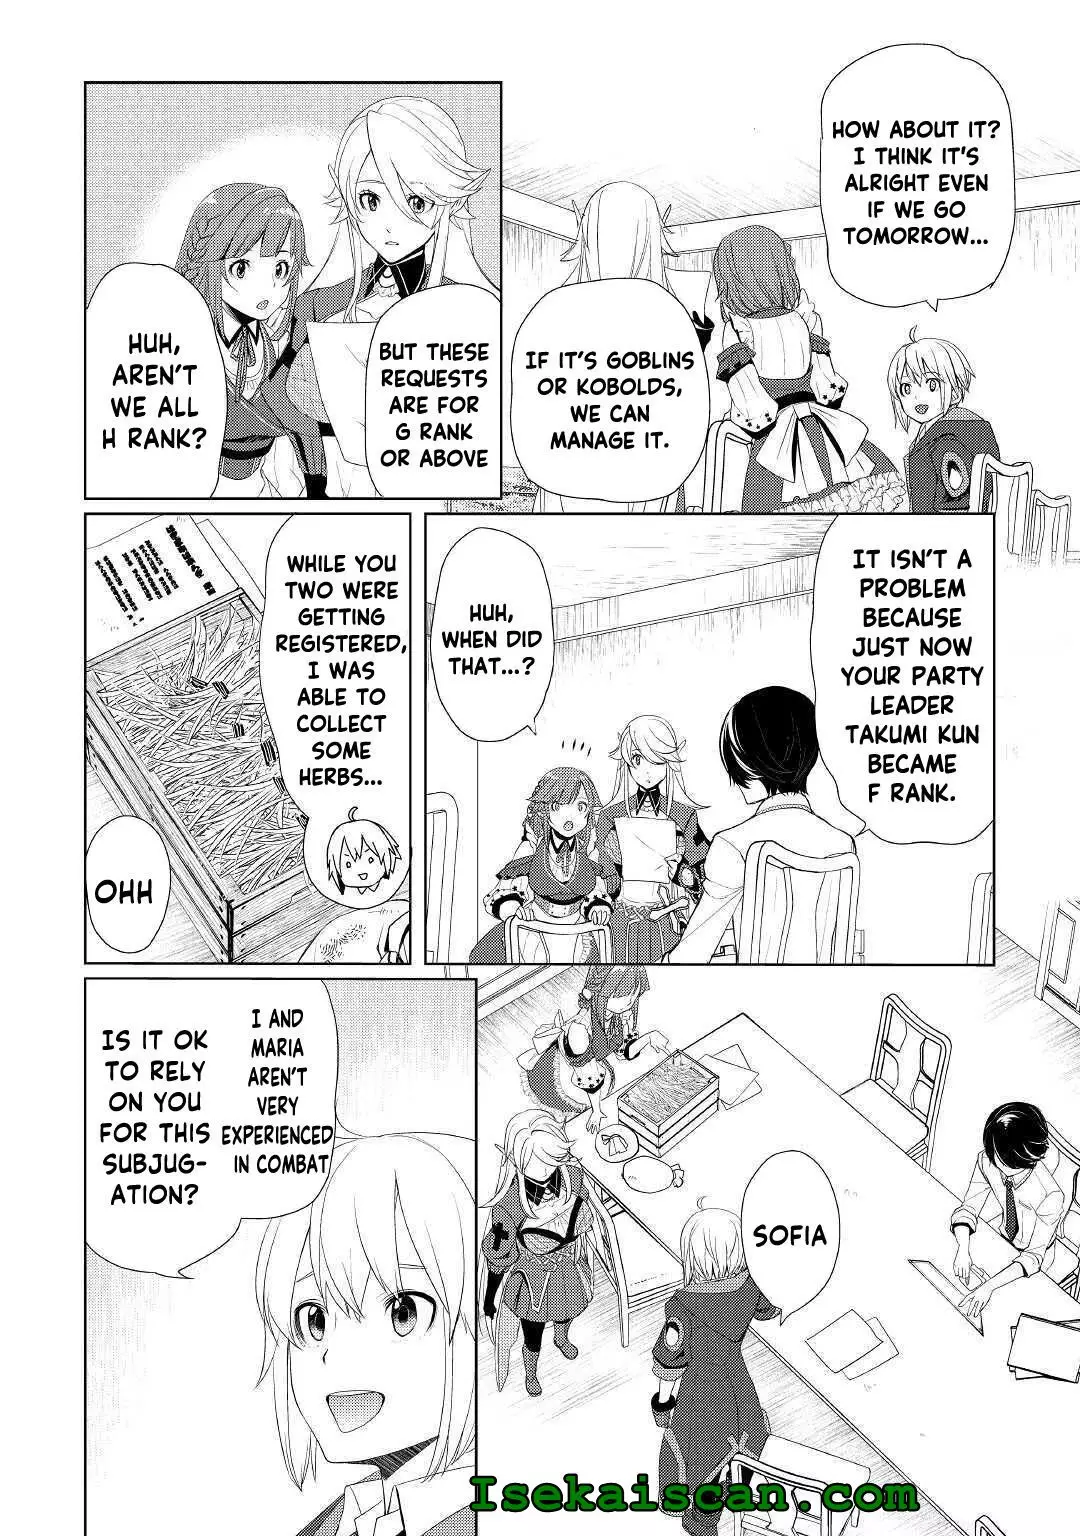 Someday Will I Be The Greatest Alchemist? - 20 page 4-277c4944